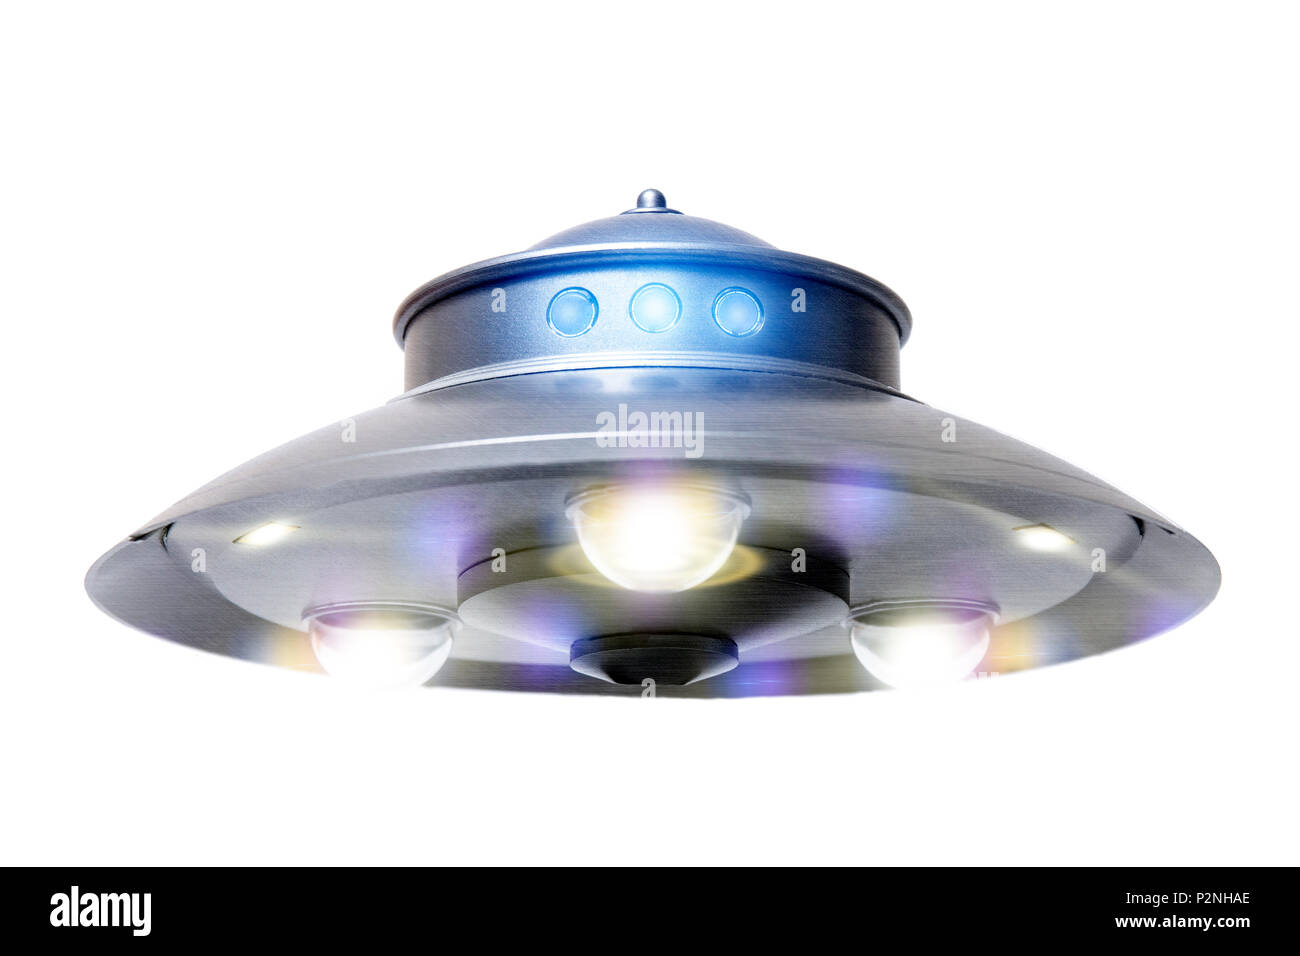 Close view of the classic dome ufo saucer. Stock Photo